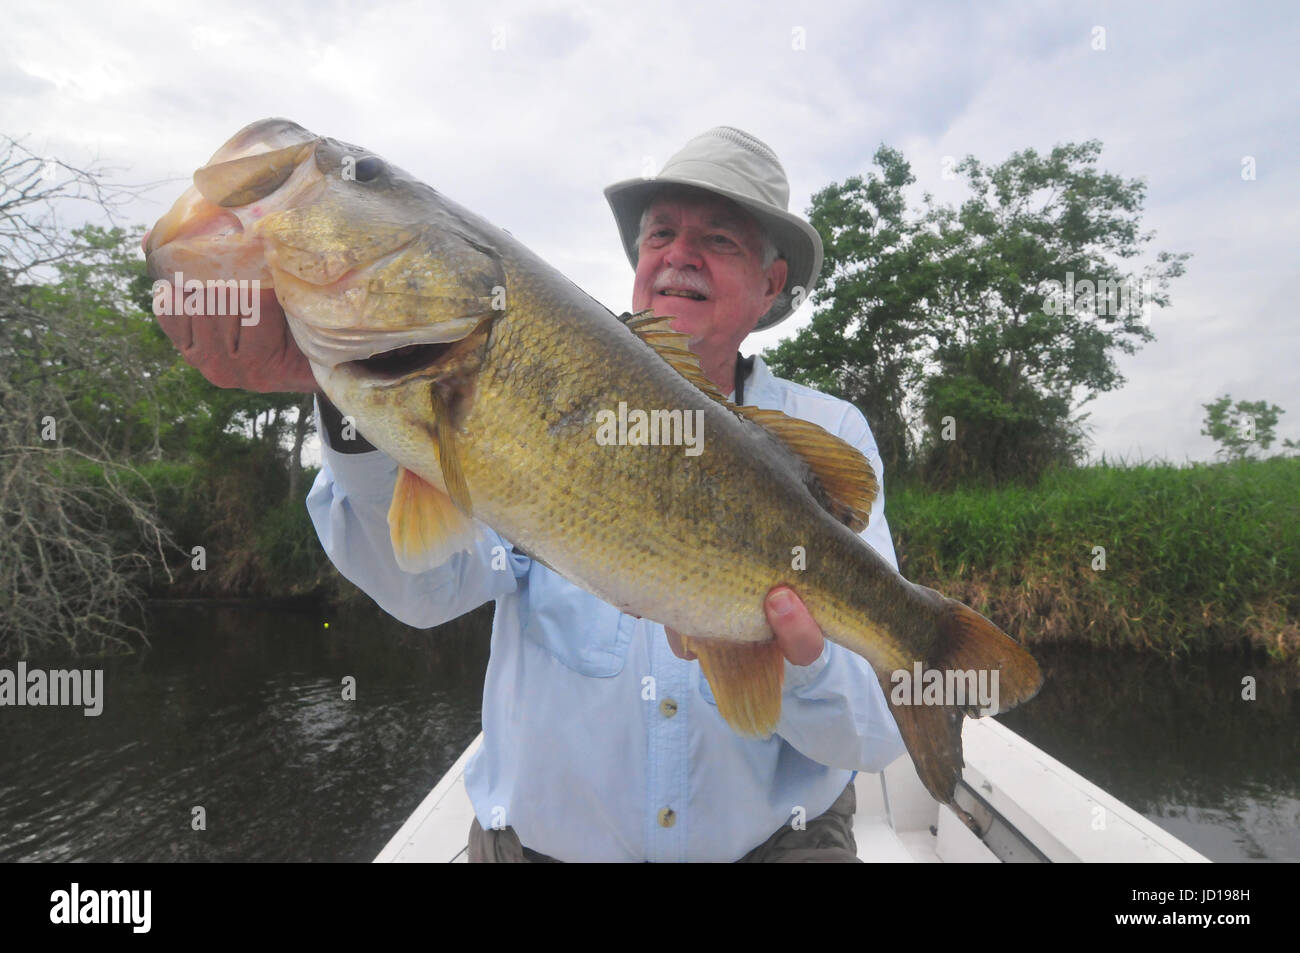 Giant largemouth bass grow big  in Florida's St. Johns River and connecting Lakes! Many fish this size, between 8 and 10 pounds make for a good day! Stock Photo